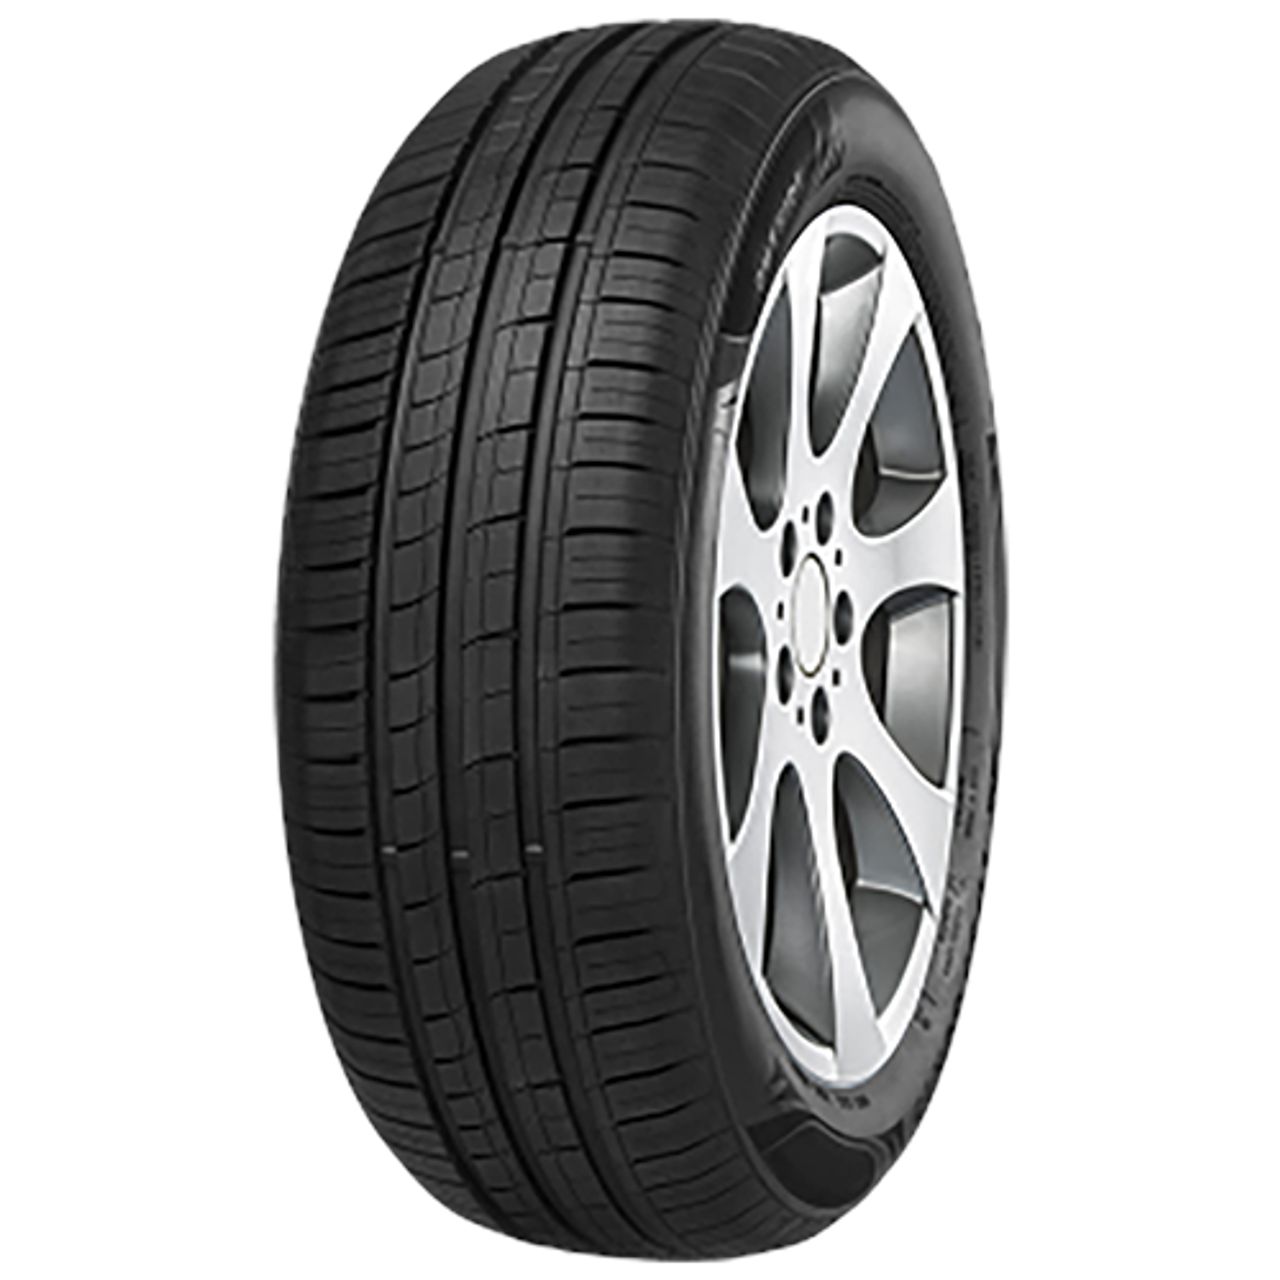 IMPERIAL ECODRIVER 4 175/70R13 82T